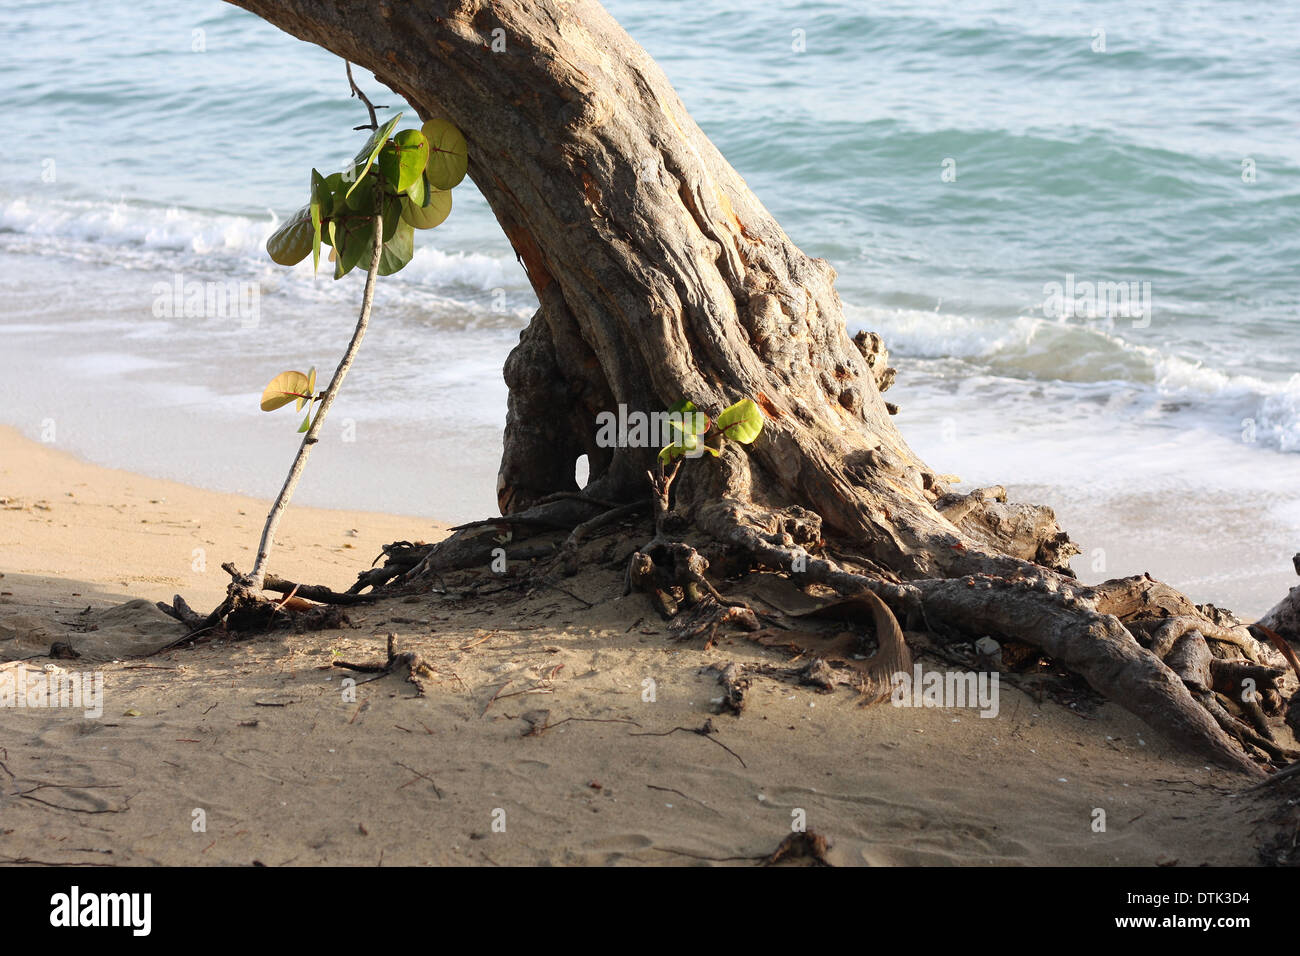 Tree growing on the beach in the Caribbean Stock Photo